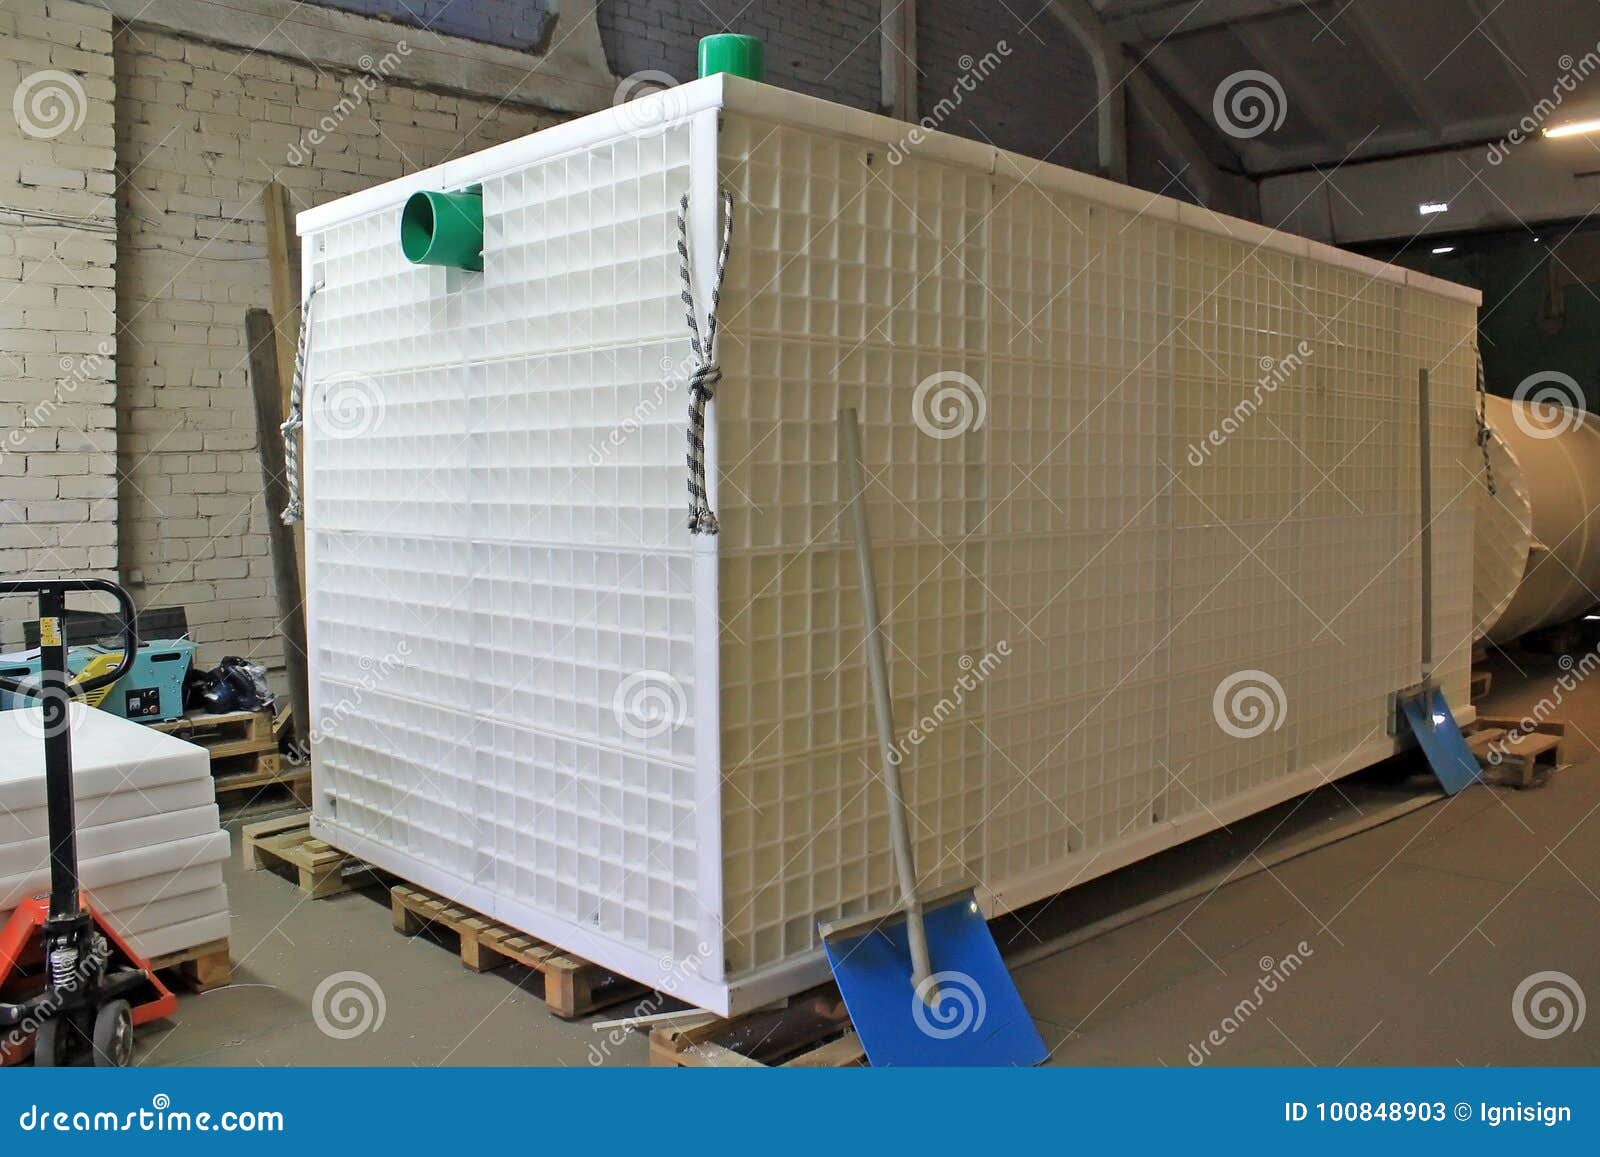 wastewater treatment system block for multi-storey building